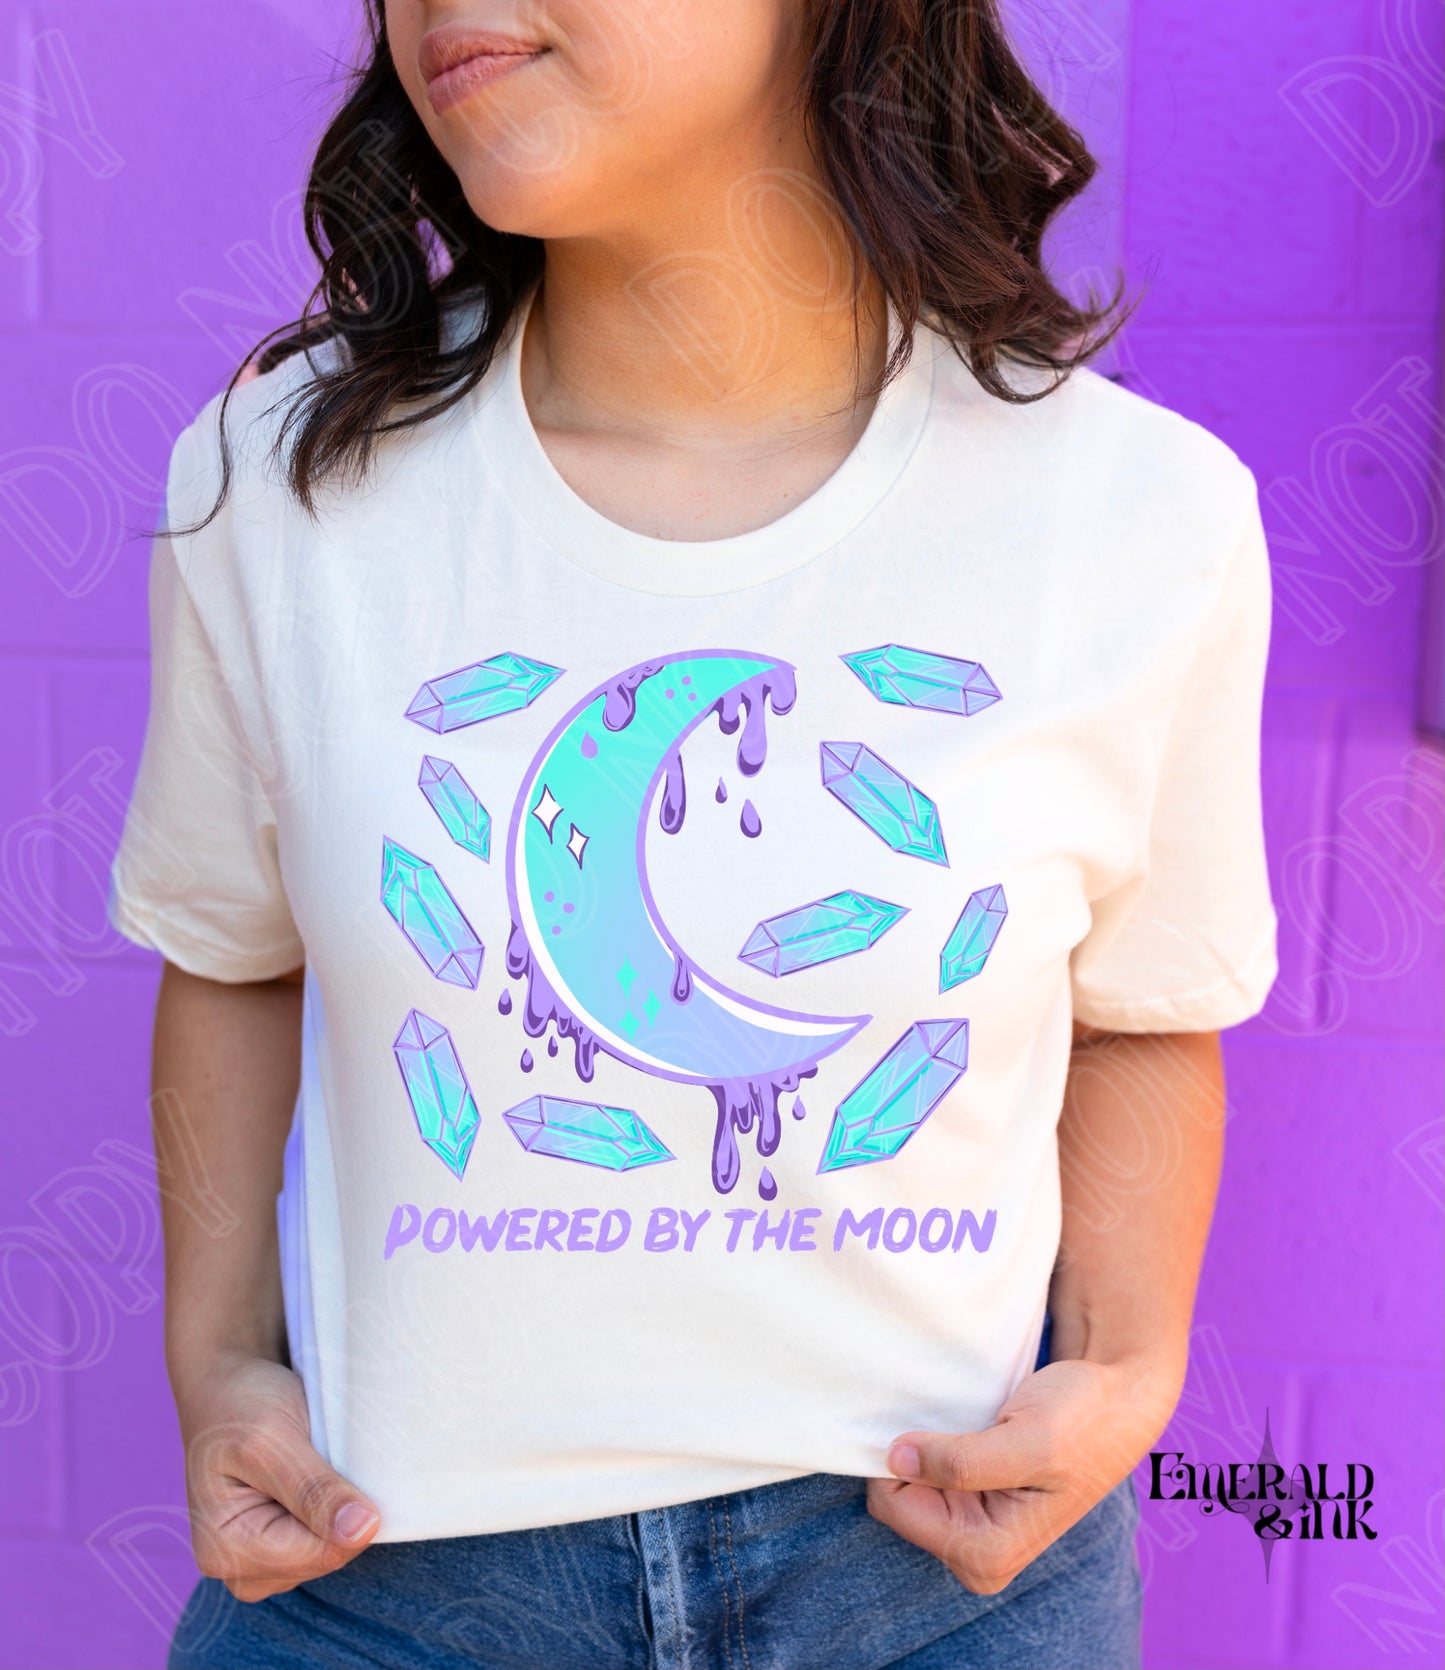 Powered by the moon - Adult Size Sublimation Transfer